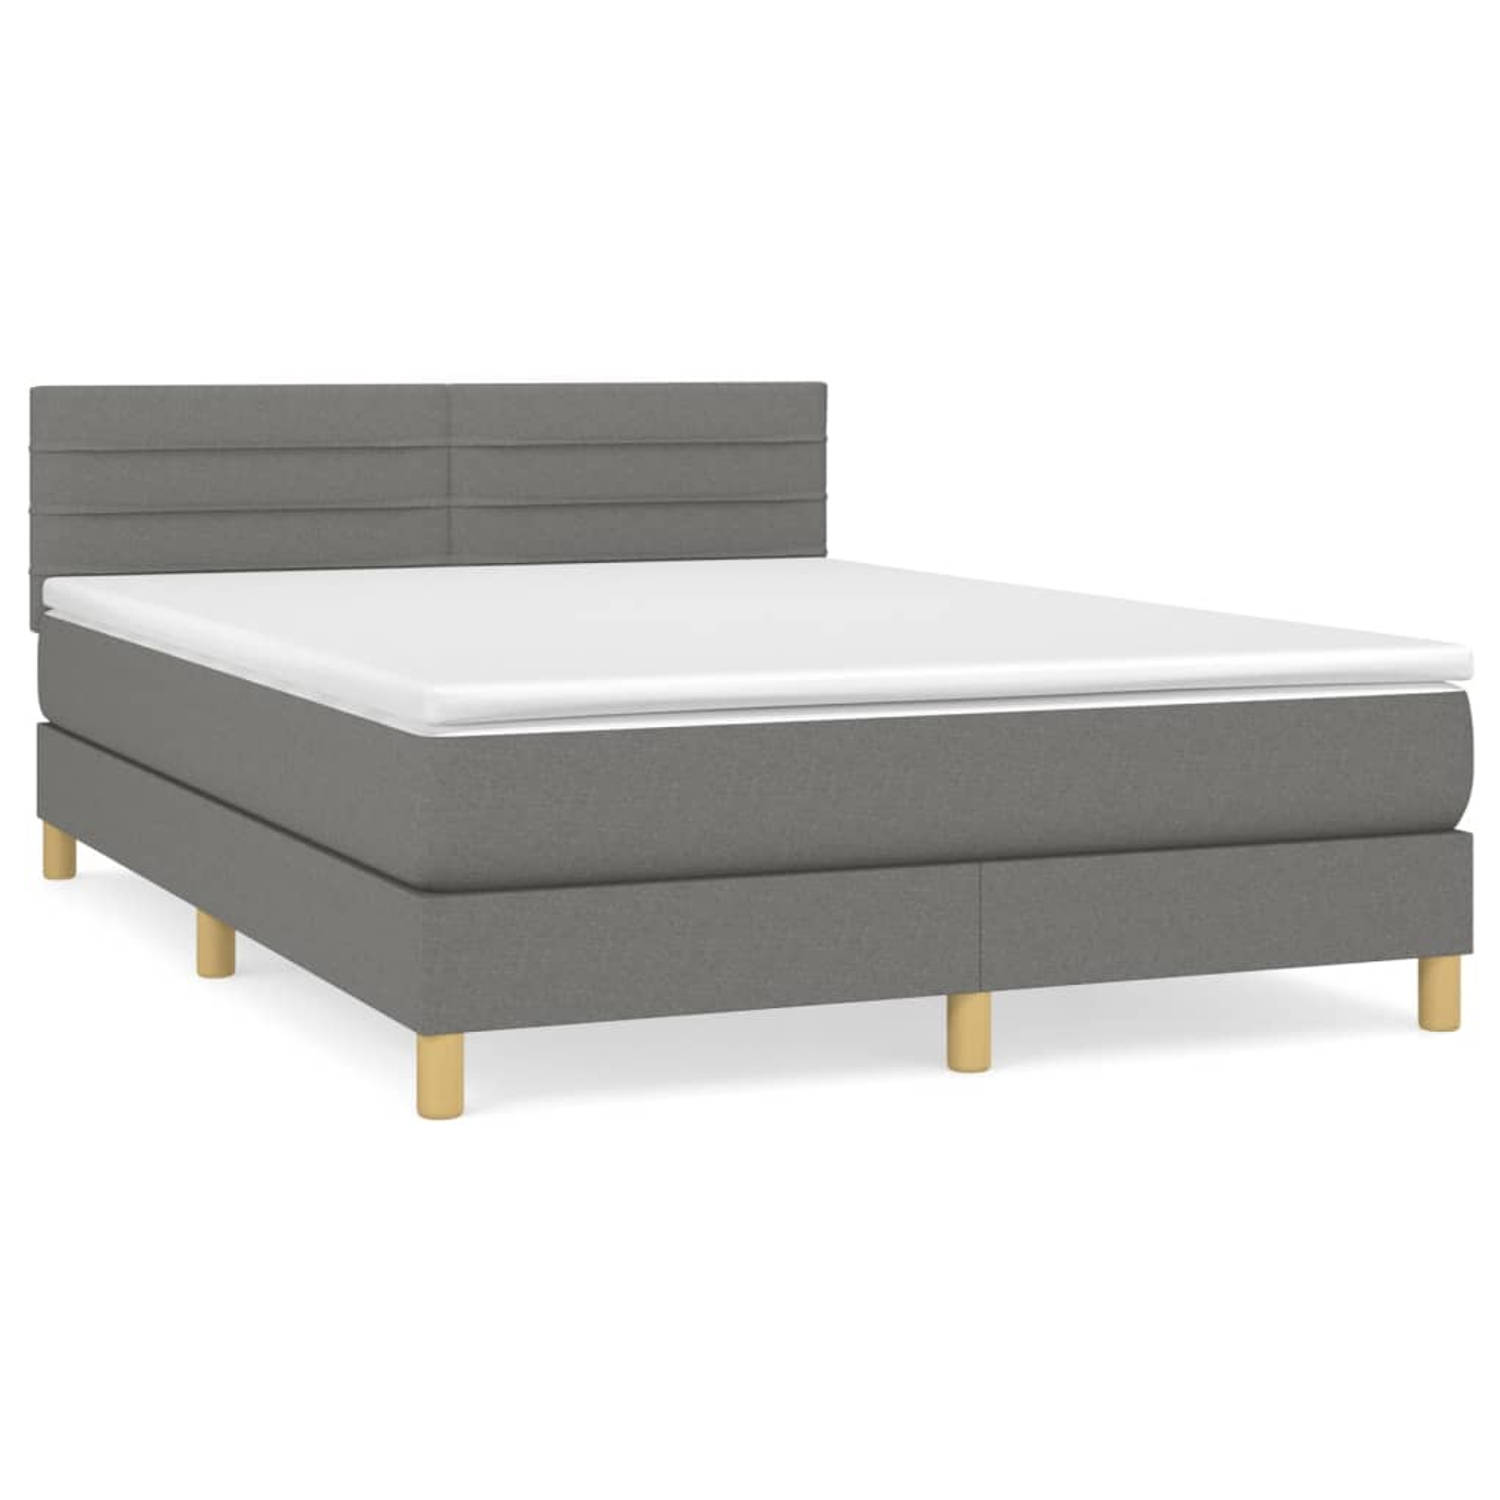 The Living Store Boxspringbed - - Bed - 193 x 144 x 78/88 cm - Donkergrijs - Stof - Duurzaam